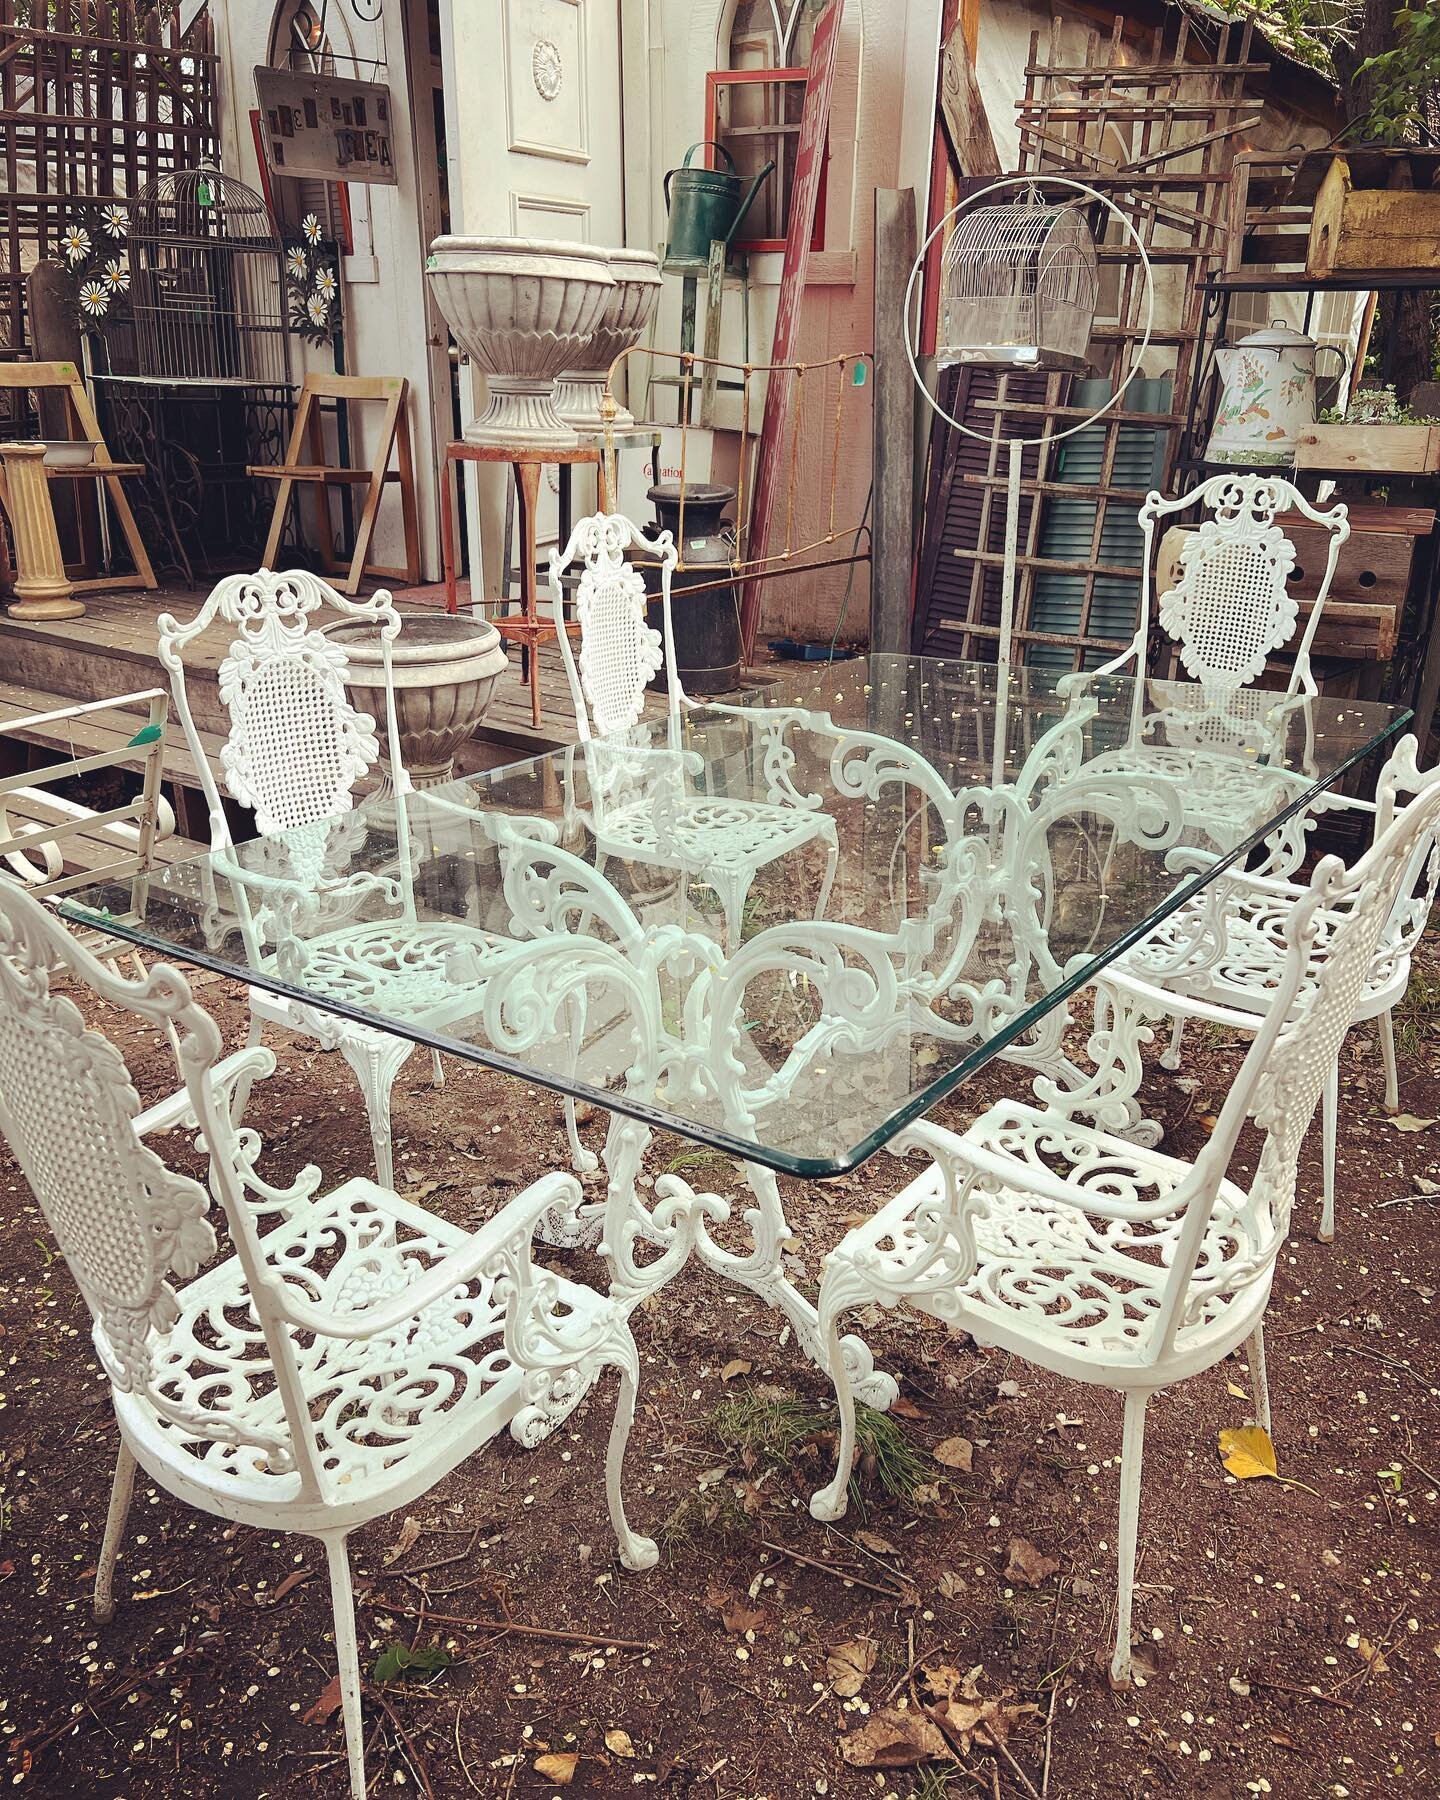 Look at this Hollywood Regency beauty! This Arthur Court style table is a stunning rare find. Make a statement in your outdoor dining area with this gorgeous double pedestal glass topped table with 6 matching chairs. Made from durable cast aluminum. 